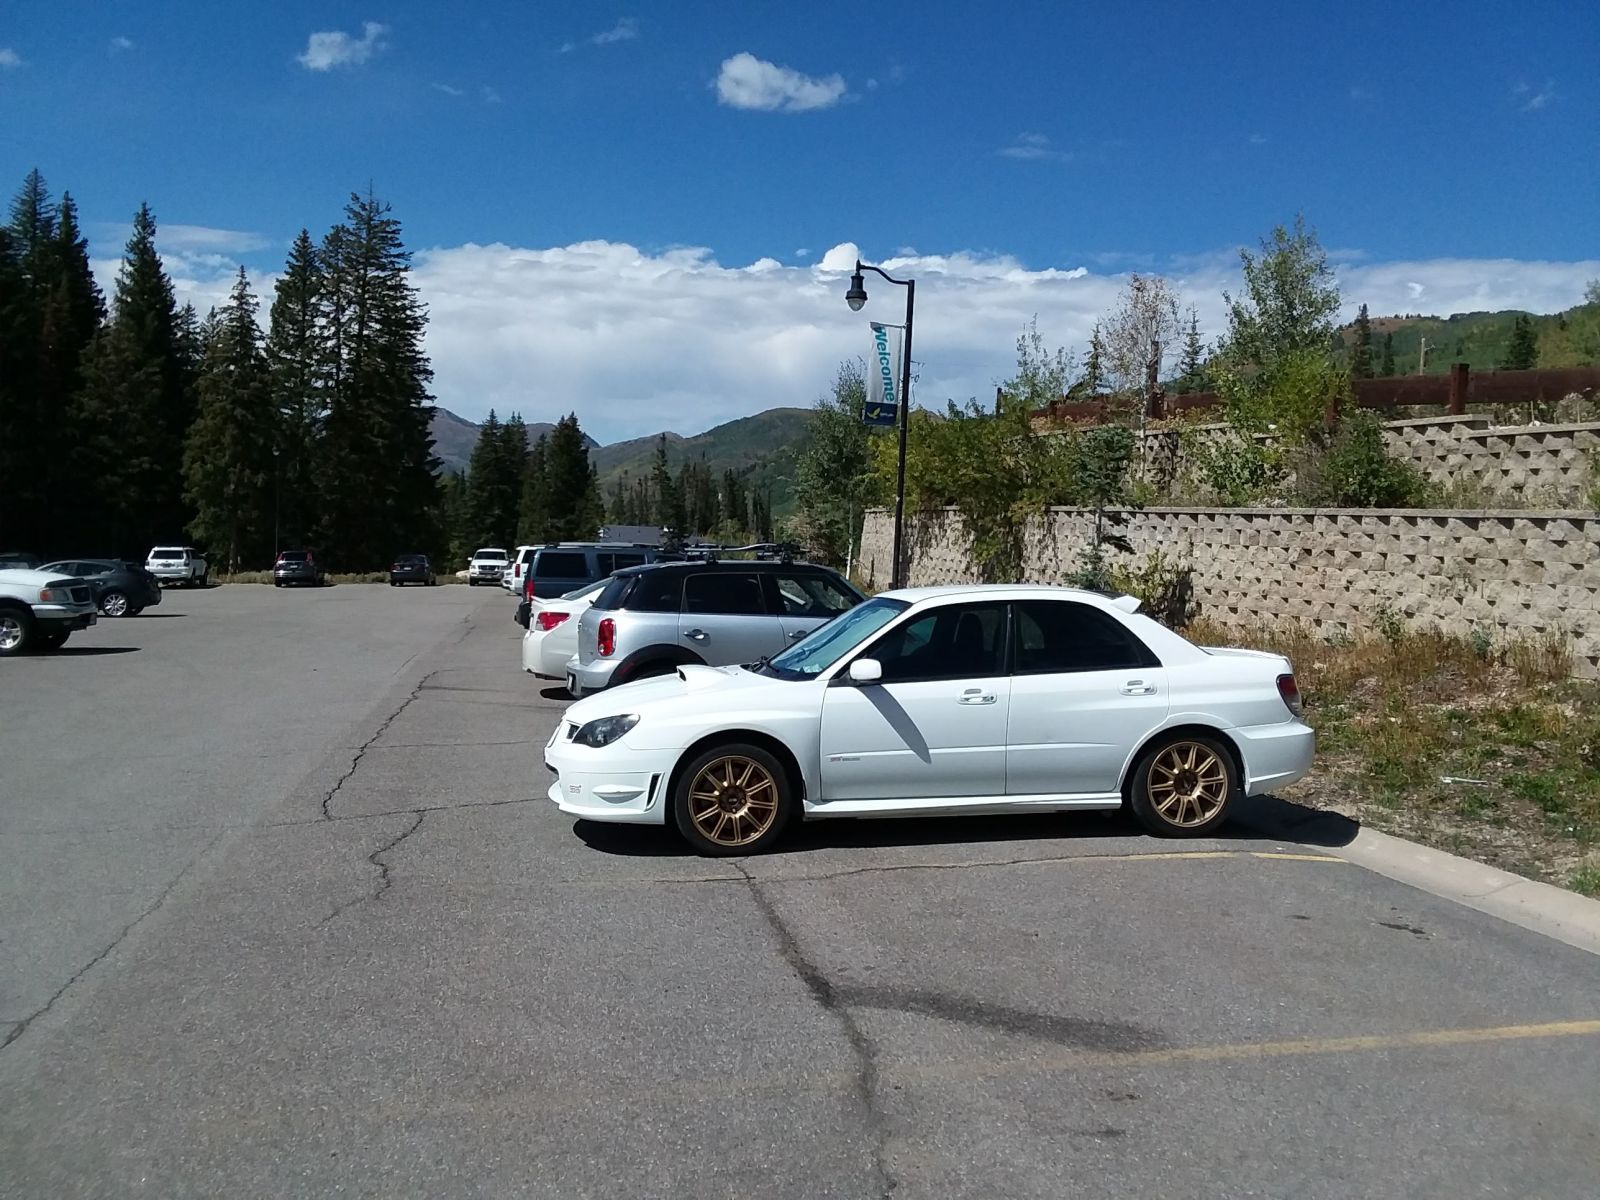 Made it back down to the car around 2pm, ready to head over to the campground and get a campsite. The STi performed beautifully all weekend and was super practical for all of my gear while still being supremely fun in the twisty parts. Plus with the AC on and some light music playing, I can drive comfortably forever.